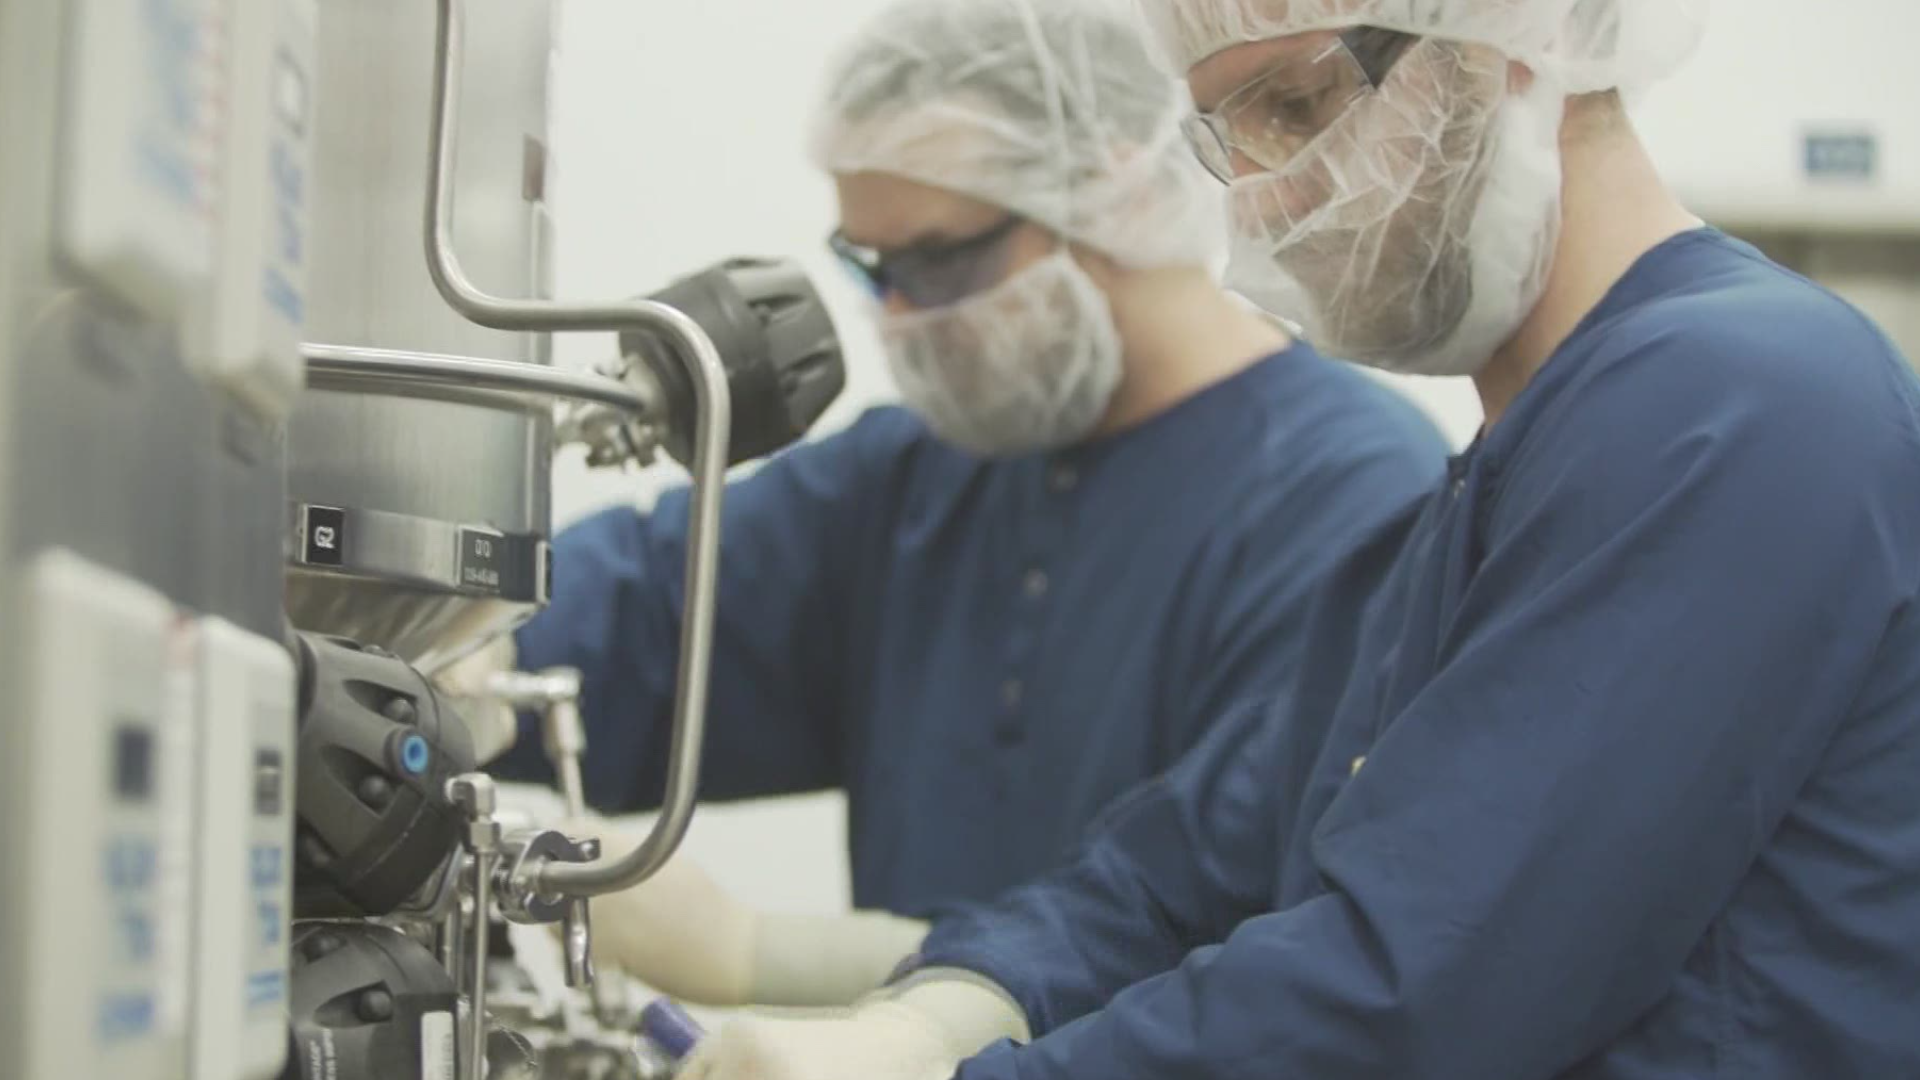 About 500,000 doses a day of Moderna's vaccine are being produced right here in Indiana.